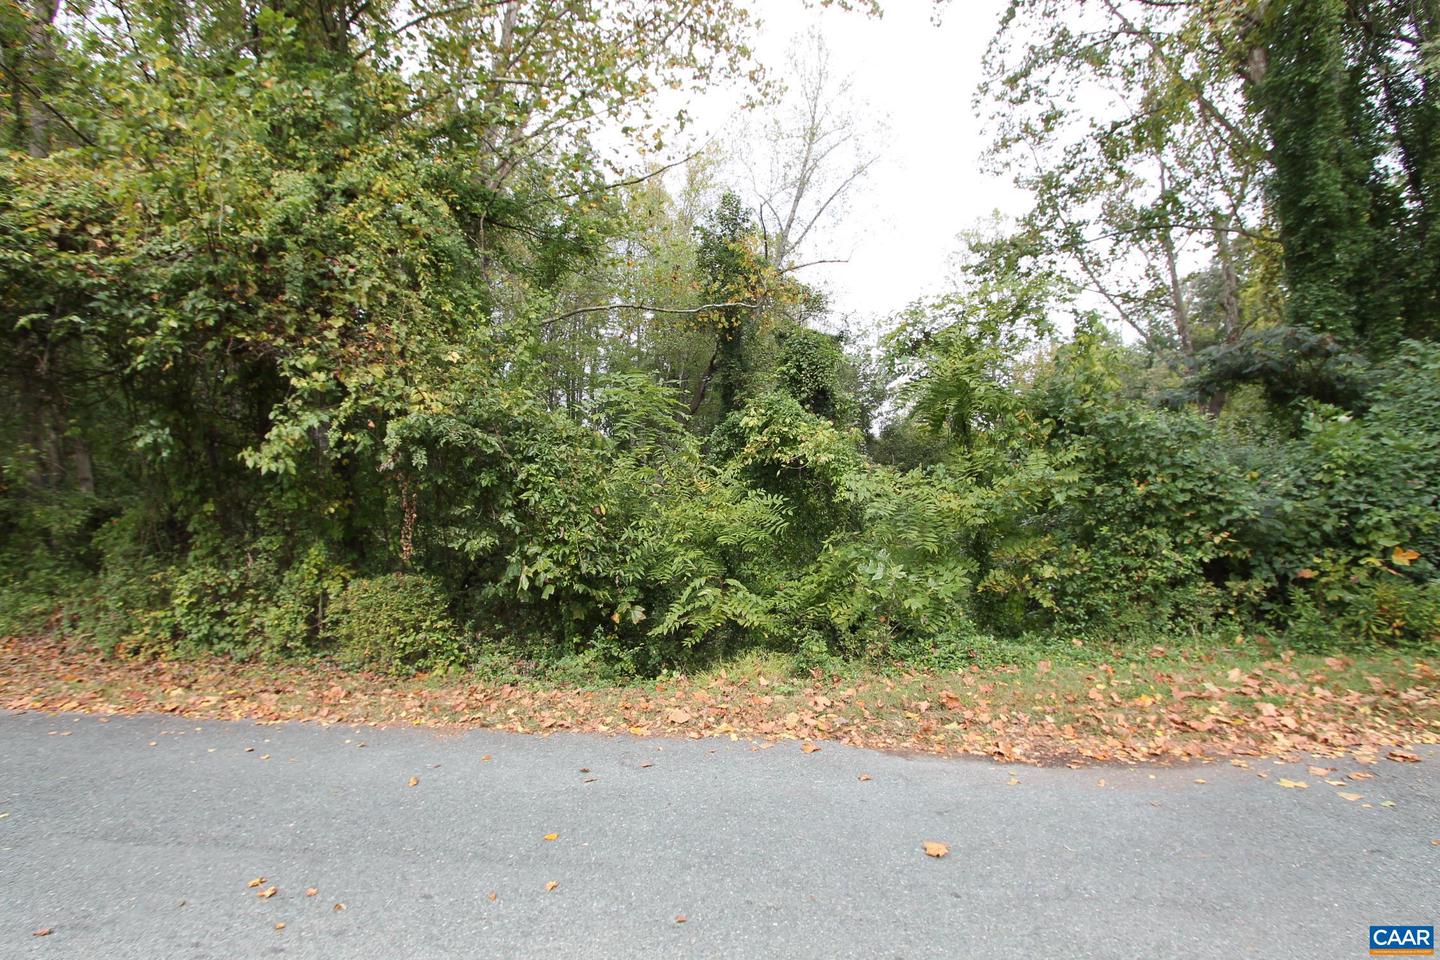 TBD MOUNTAIN VIEW DR, CHARLOTTESVILLE, Virginia 22903, ,Land,For sale,TBD MOUNTAIN VIEW DR,646500 MLS # 646500